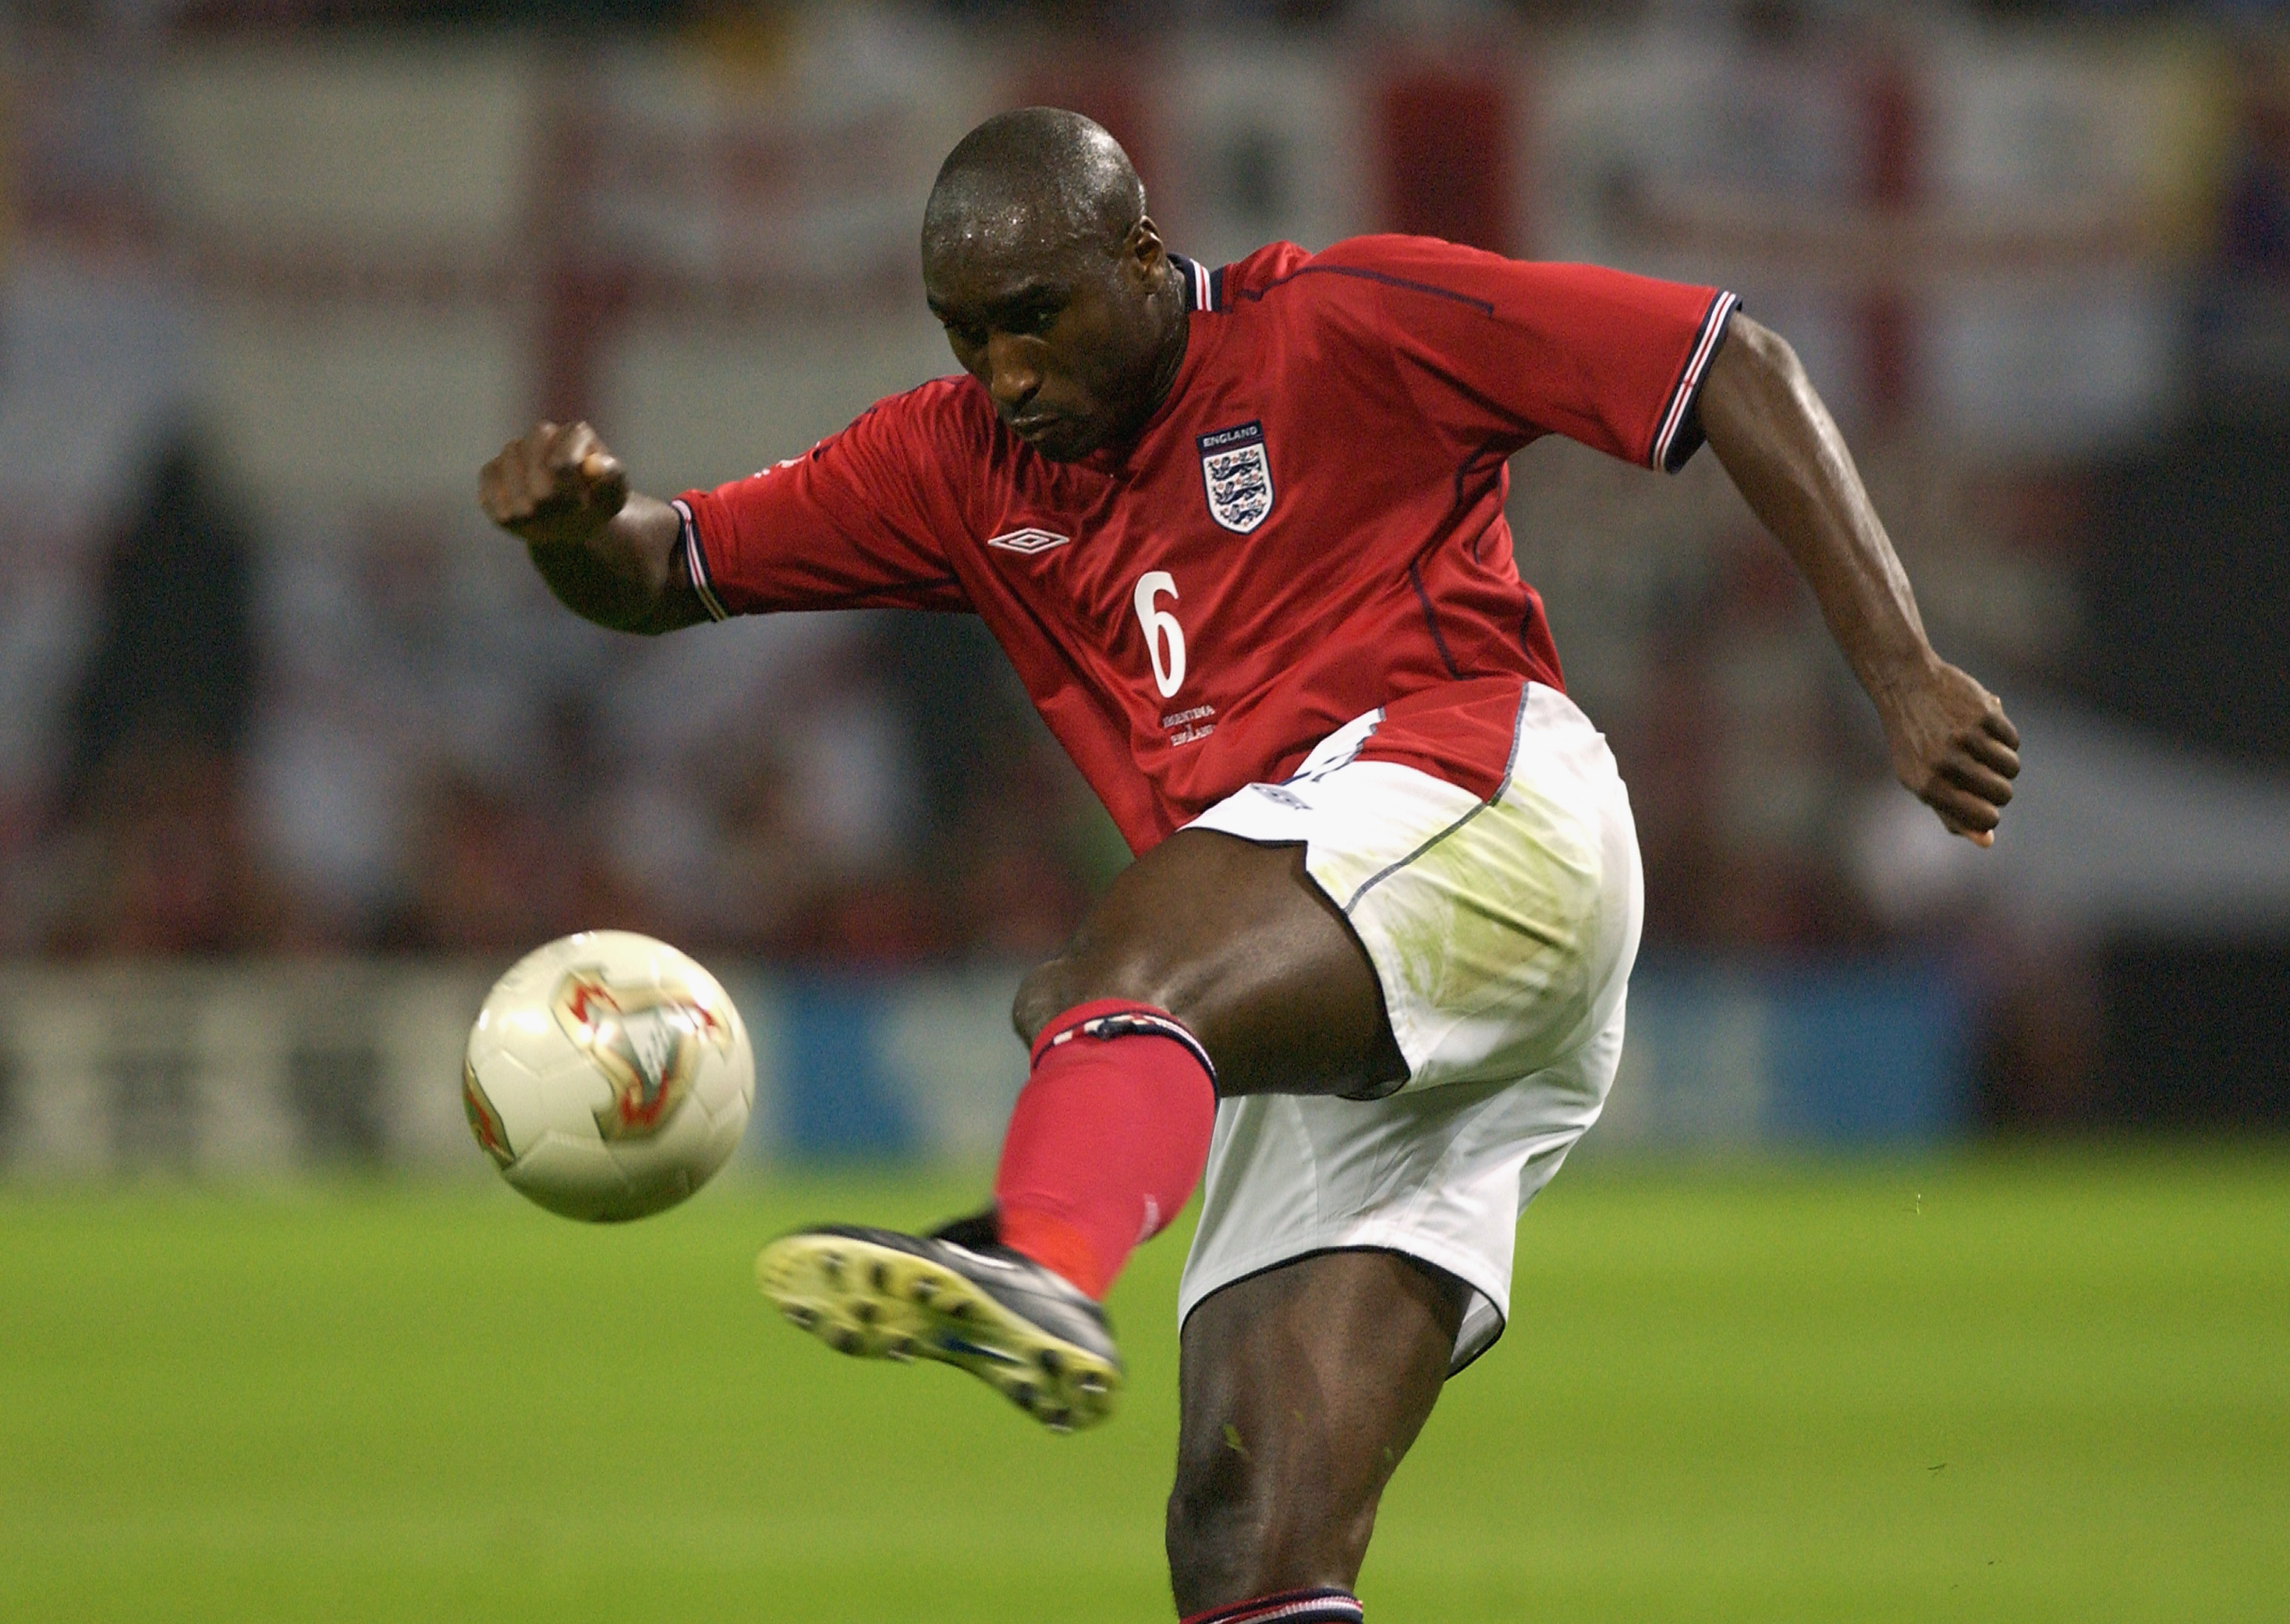 SAPPORO - JUNE 7:  Sol Campbell of England clears the ball from danger during the FIFA World Cup Finals 2002 Group F match between England and Argentina played at the Sapporo Dome, in Sapporo, Japan on June 7, 2002. England won the match 1-0. DIGITAL IMAG